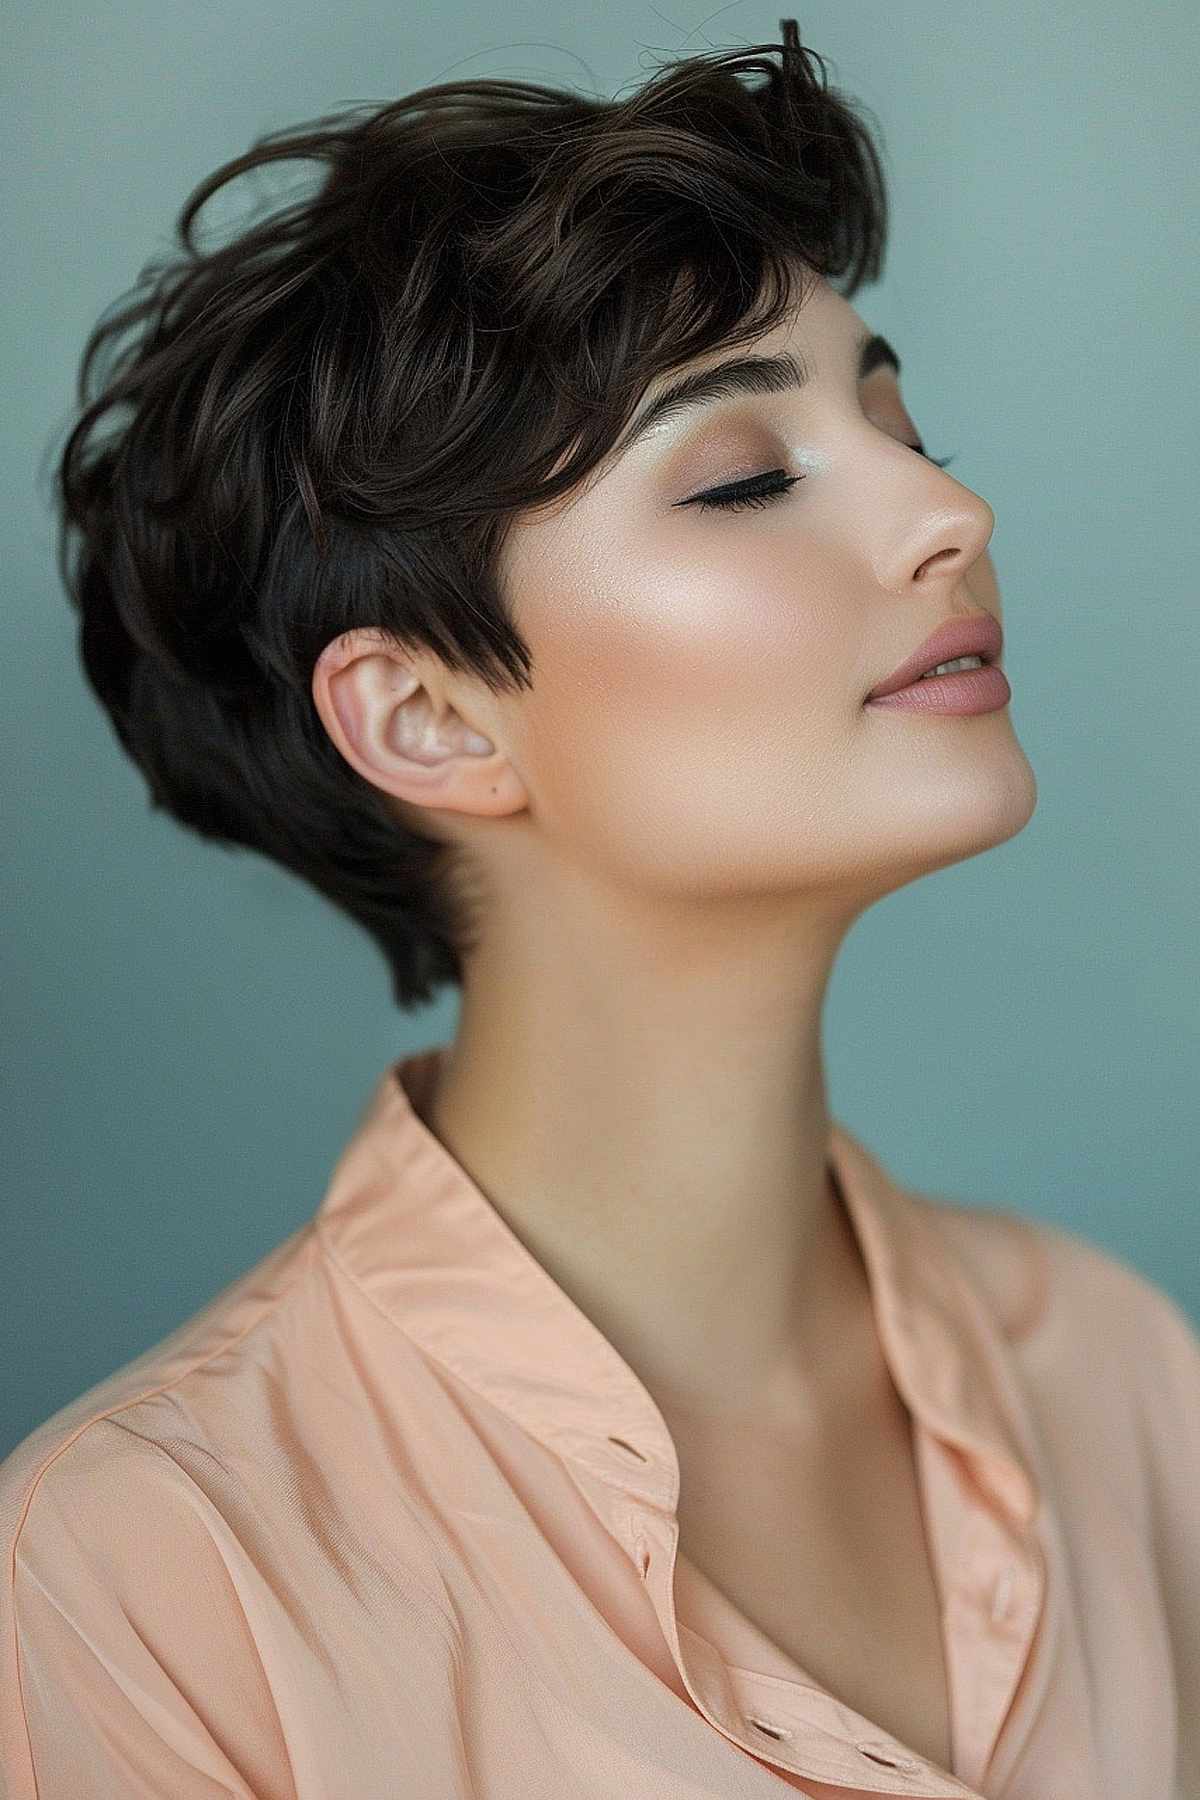 A model showcasing a feathered pixie cut with soft textures, in a natural dark tone highlighted to add depth.